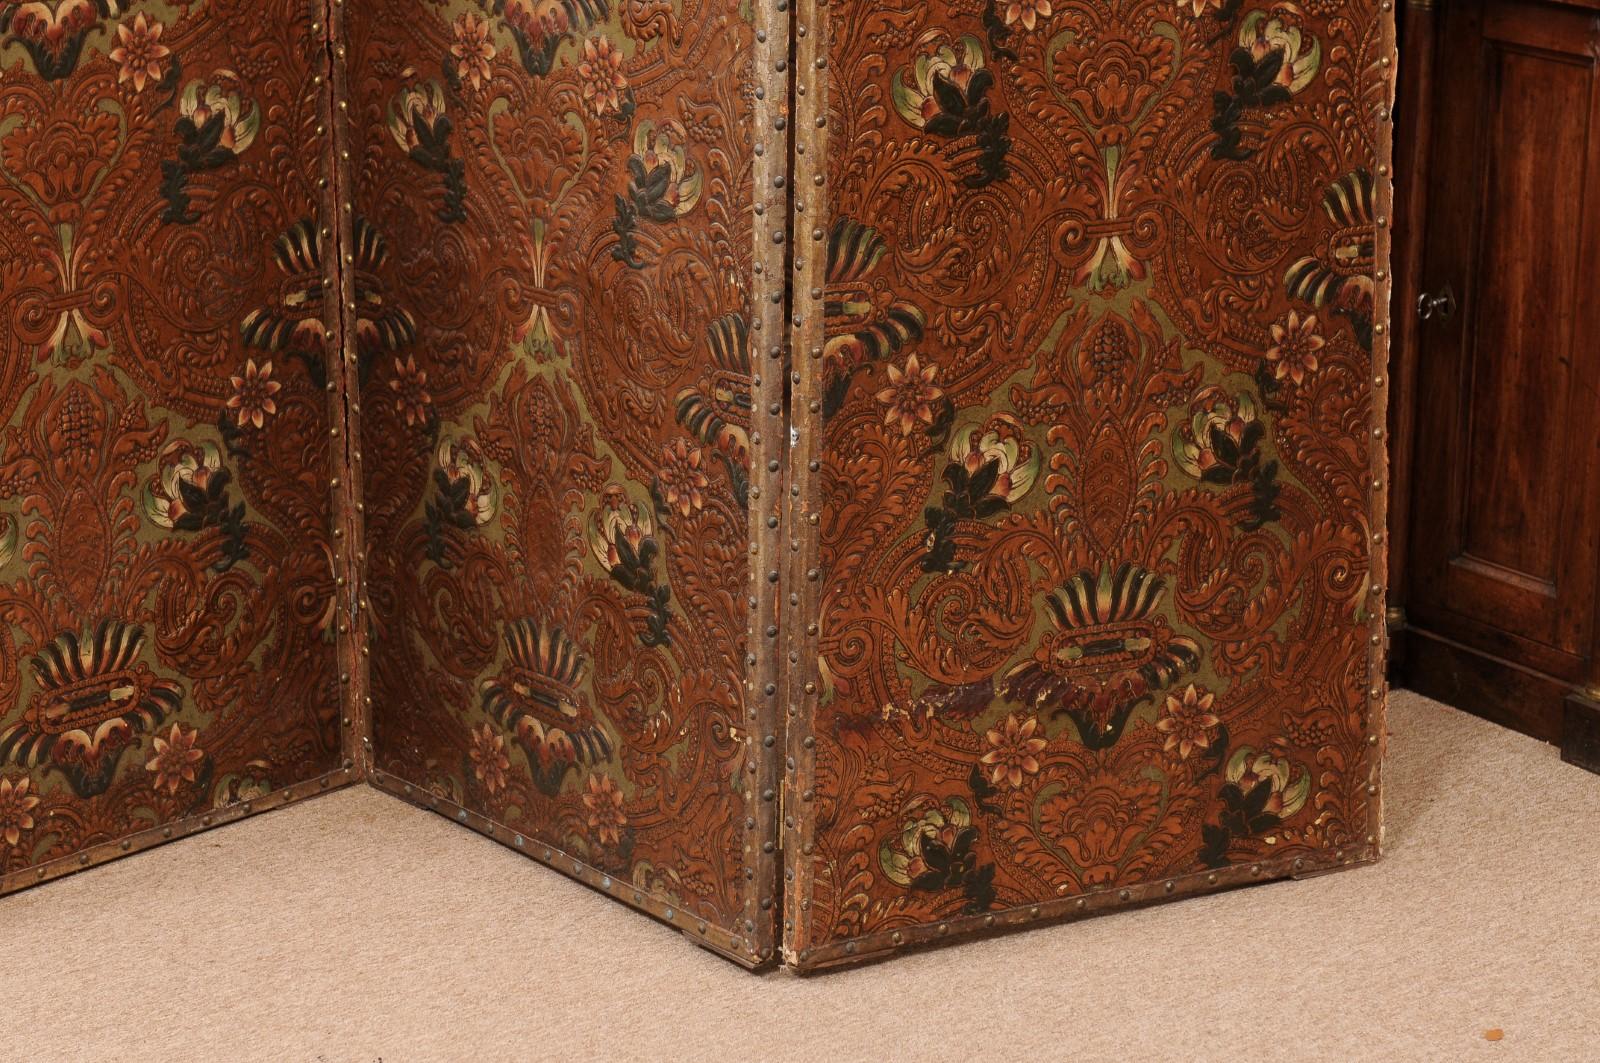  19th Century French 4 Panel Embossed & Painted Folding Screen For Sale 1